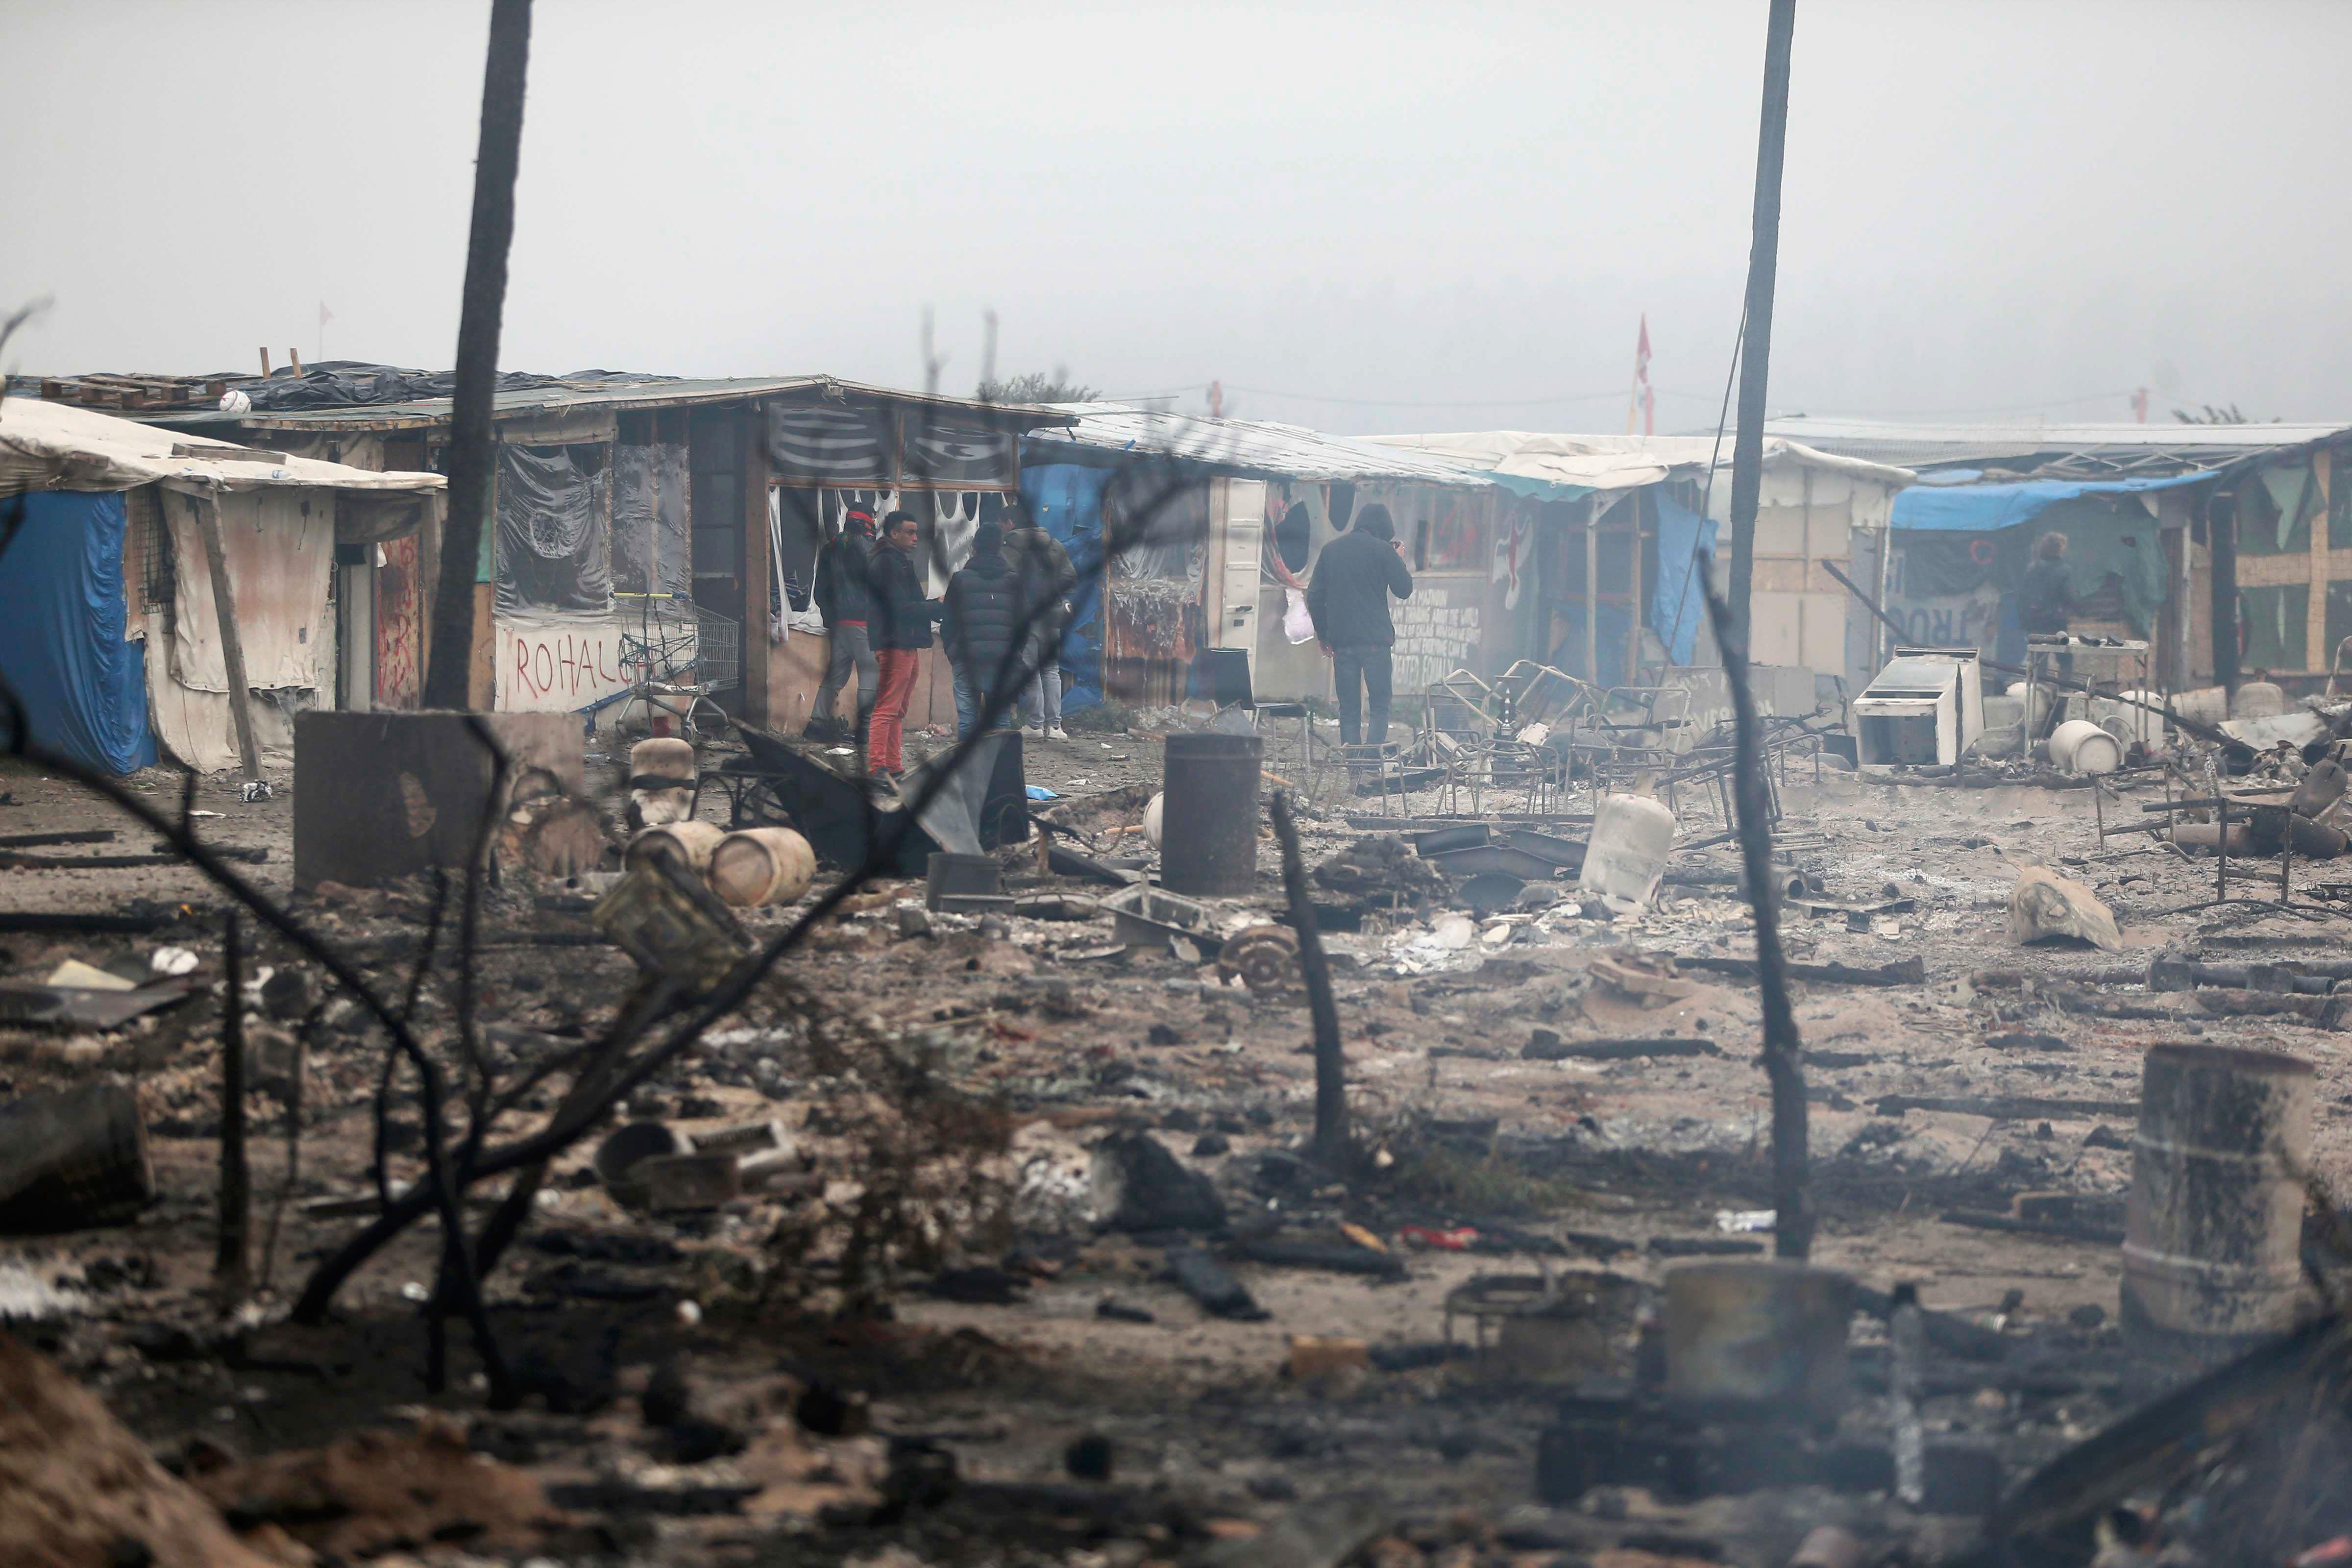 Miigrants stand in the charred debris from destroyed makeshift shelters and tents in the 